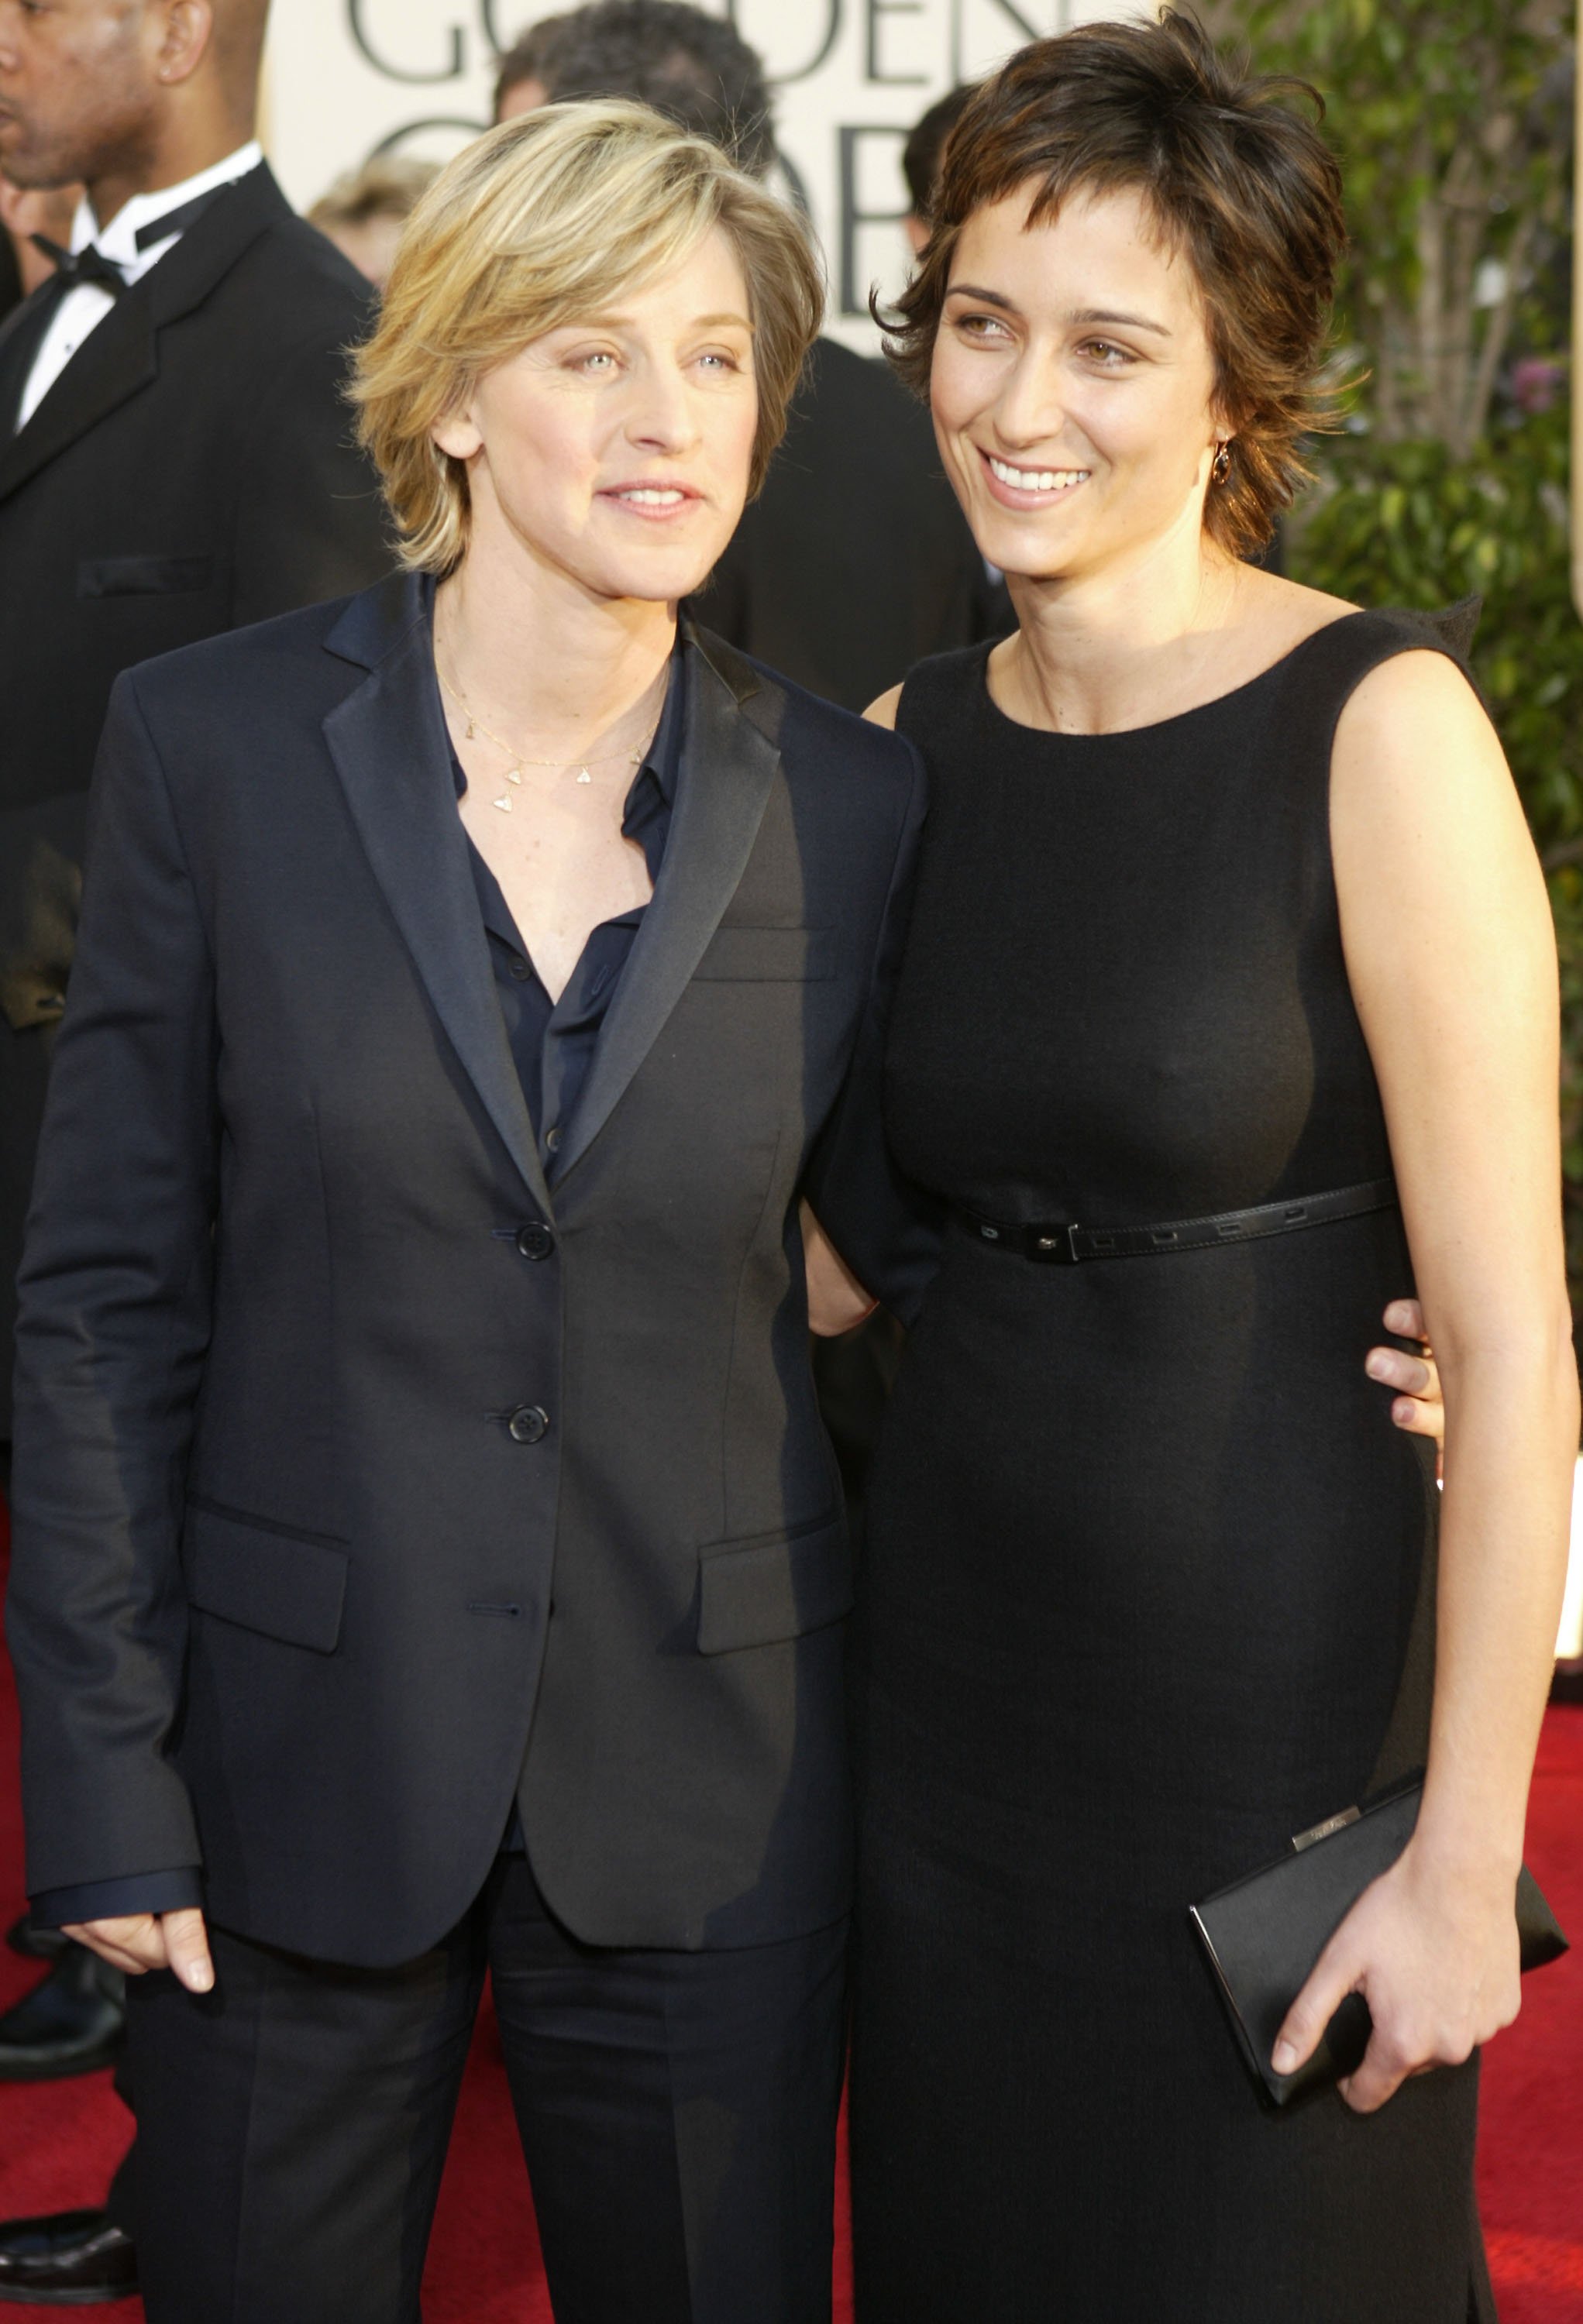 Ellen DeGeneres and Alexandra Hedison arrive to the 61st Annual Golden Globe Awards on January 25, 2004, in Beverly Hills, California. I Source: Getty Images